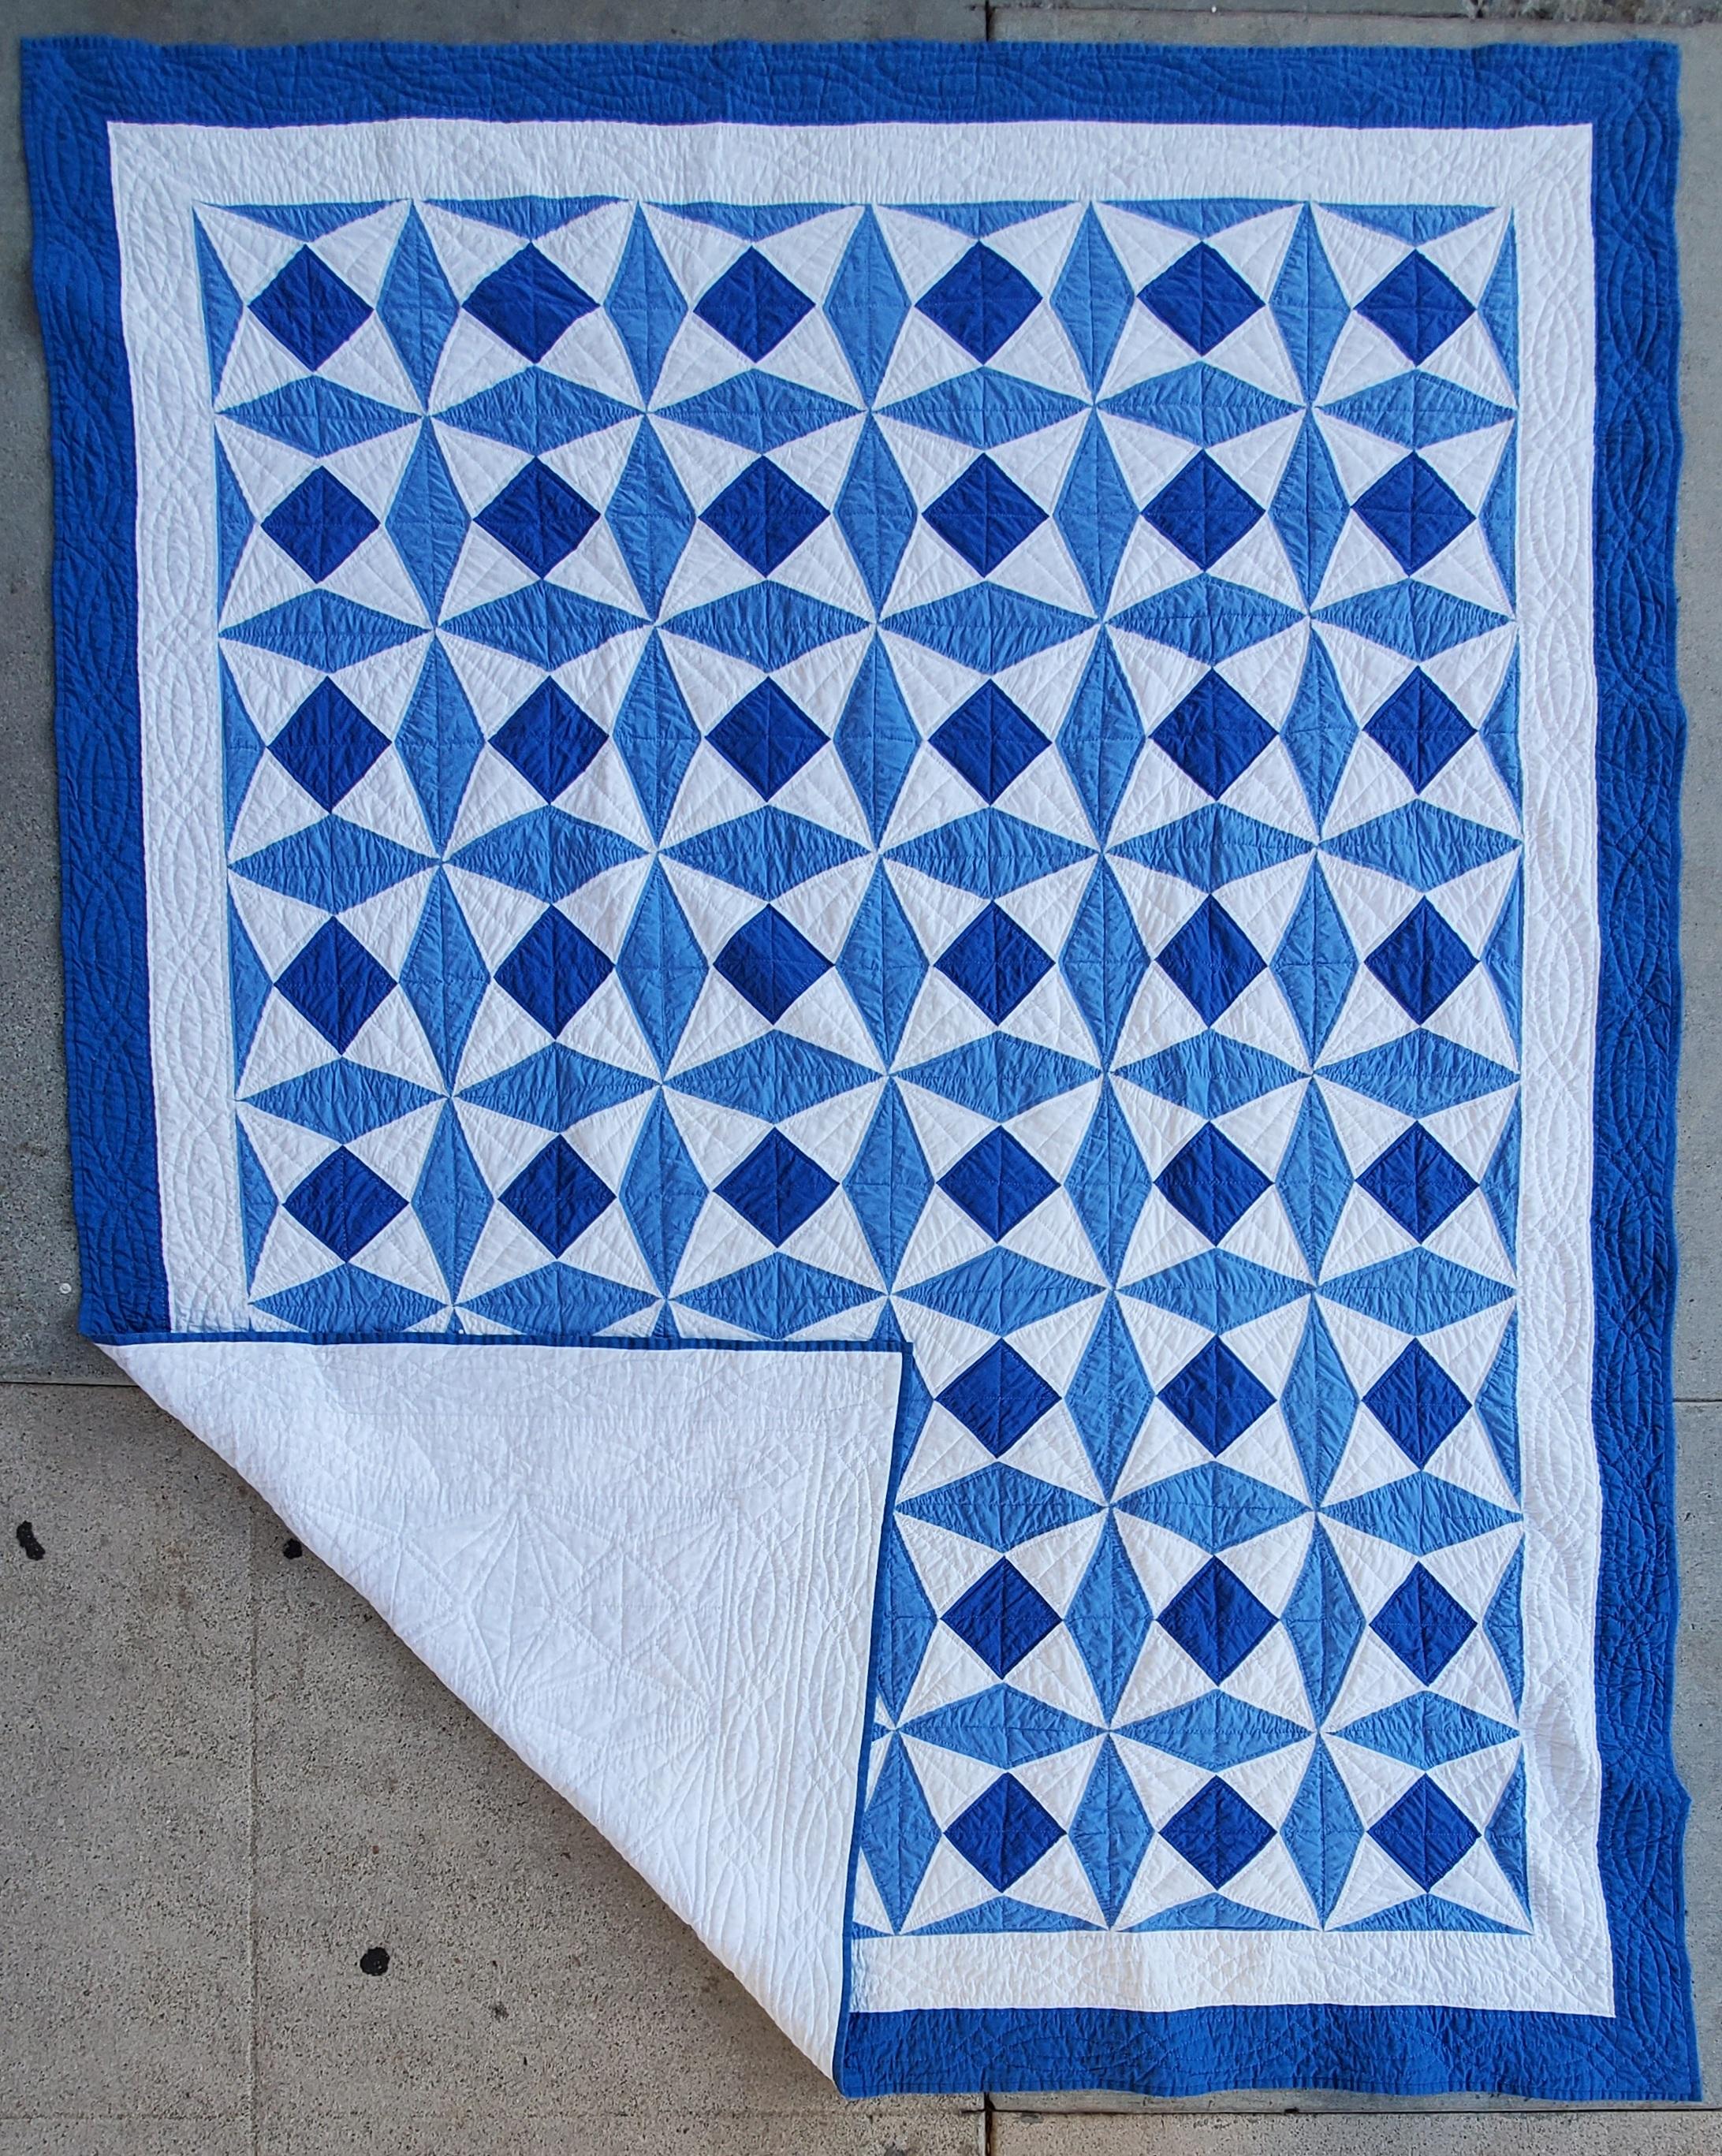 This unusual blue & white geometric quilt is in very good condition and nice piecework.